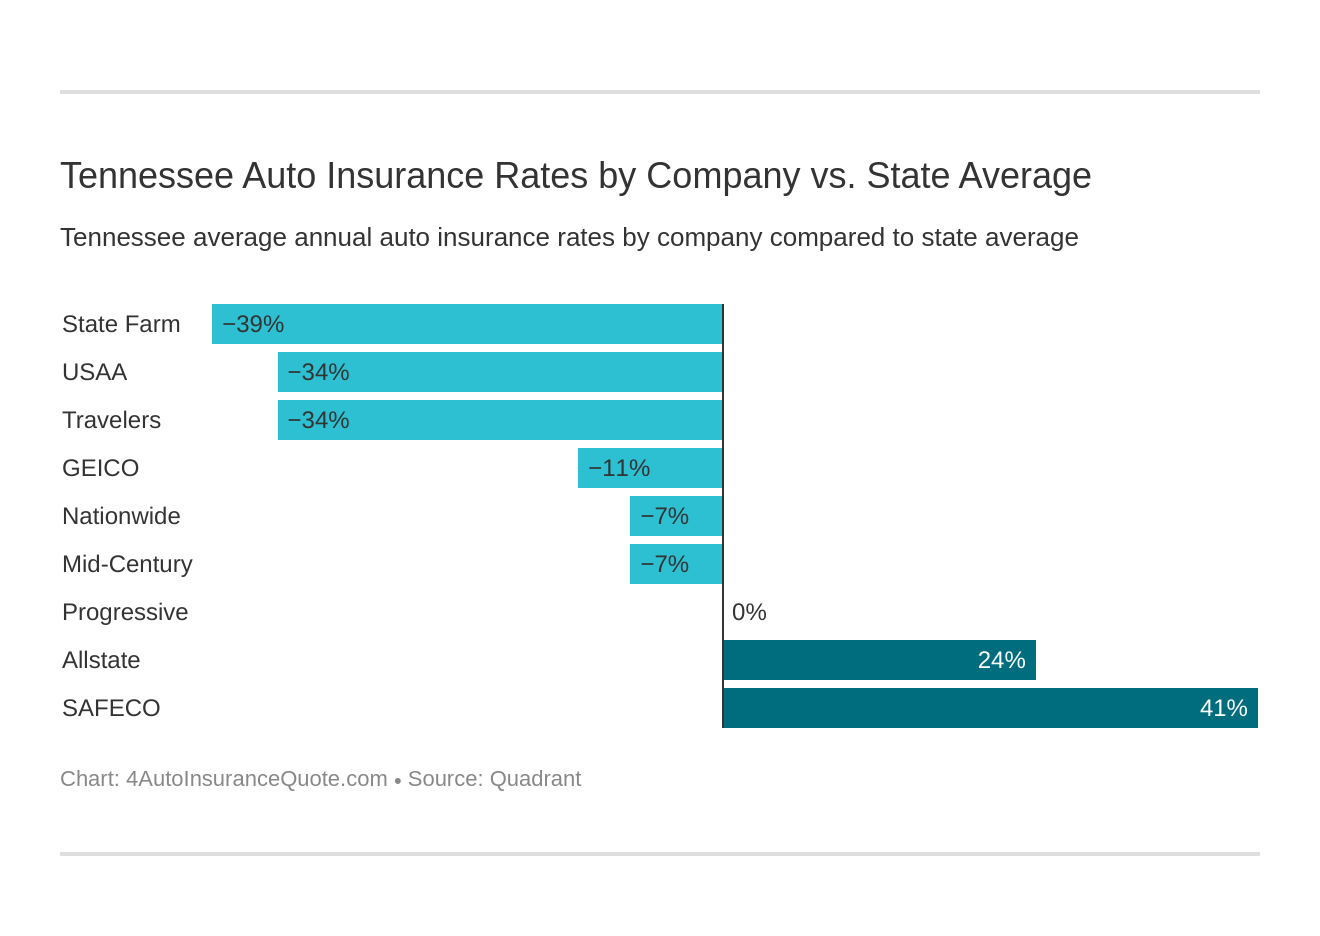 Tennessee Auto Insurance Rates by Company vs. State Average